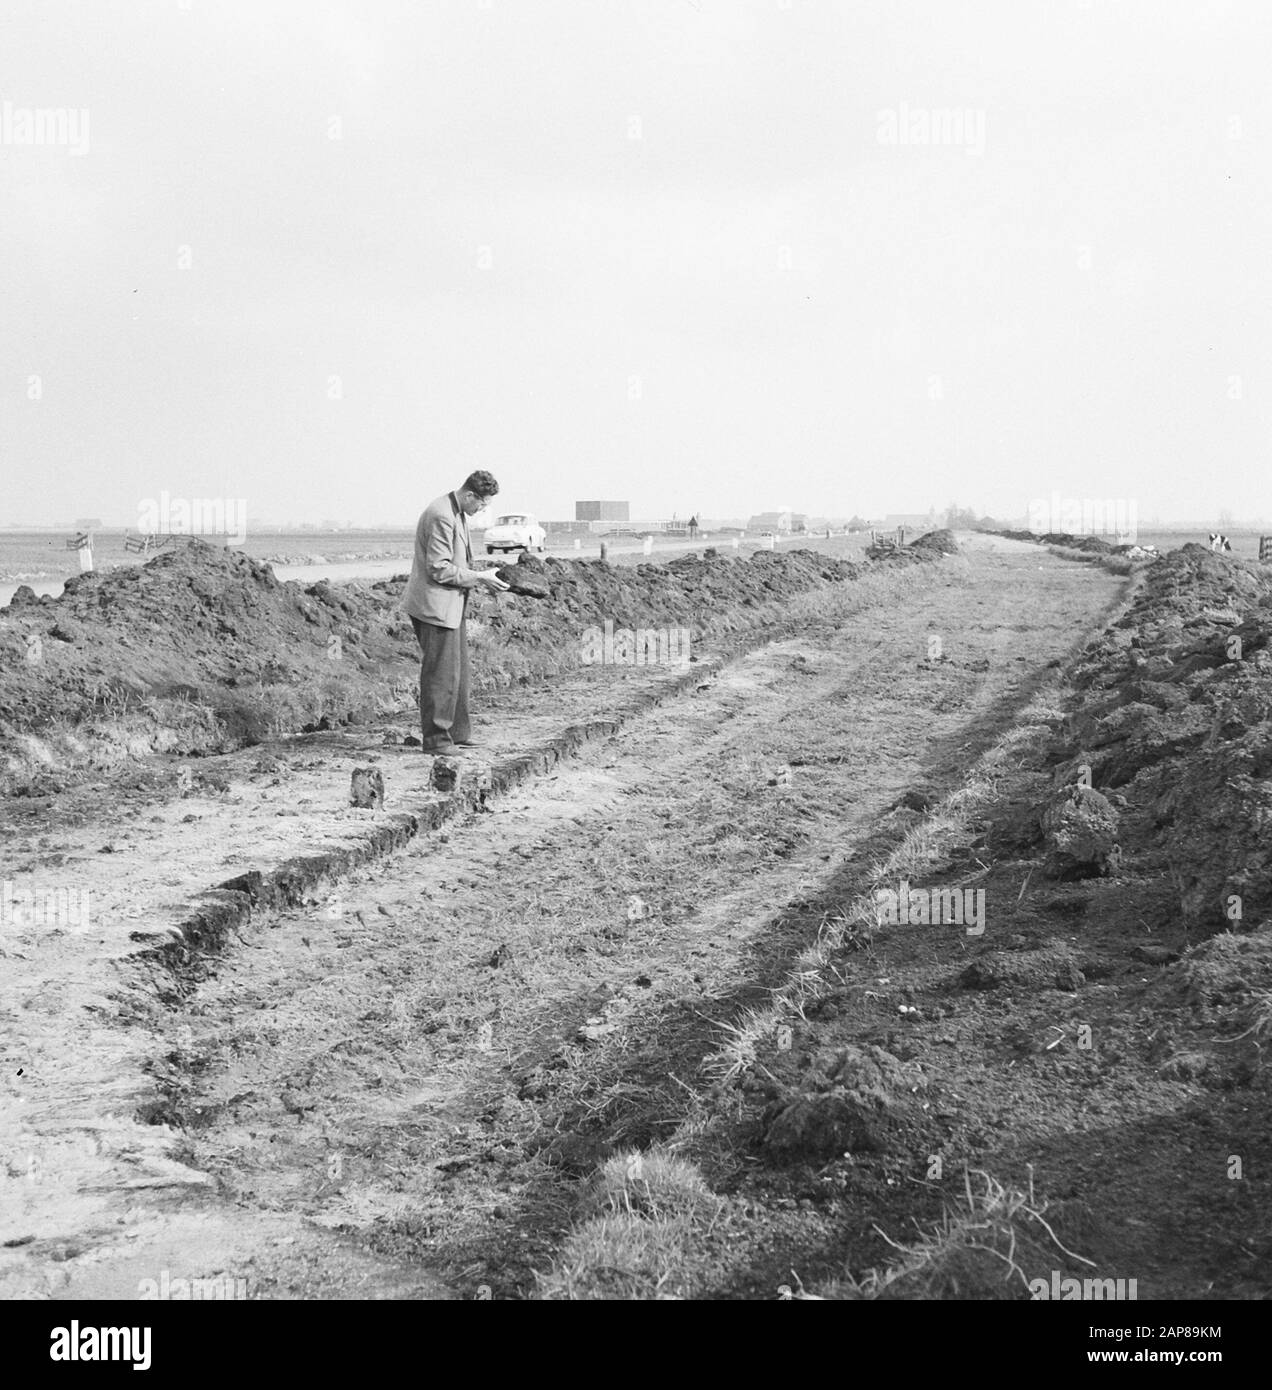 construction and improvement of roads, dikes and savings basins, cunets, stacked sods, peat, men Date: May 1962 Location: Broek in Waterland Keywords: construction and improvement of roads, cunets, dikes and savings basins, men, stacked sods, peat Stock Photo